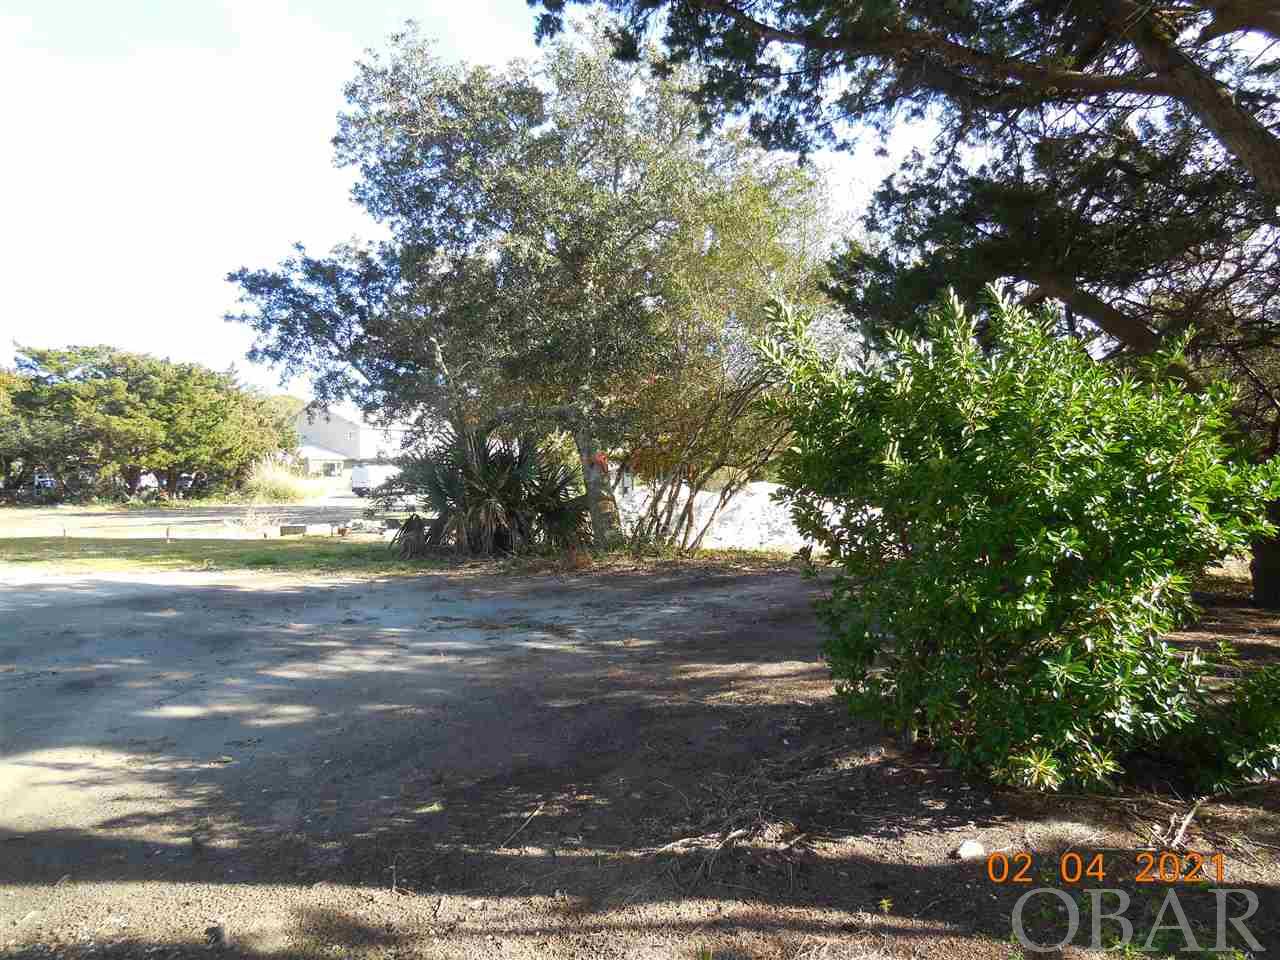 Be a part of the new 7 lot Live Oak Village subdivision! This 5000 sq. ft. property has a great location for a primary year-round residence or a vacation rental home. Lot# 11 R conveys with a 4 bedroom septic permit and a 3 bedroom/2 bath water meter. Restrictive covenants in place to retain the historic charm and quaintness of Ocracoke. Choose from several classic coastal home designs! Taxes are an estimate only. Currently being taxed as one large parcel.